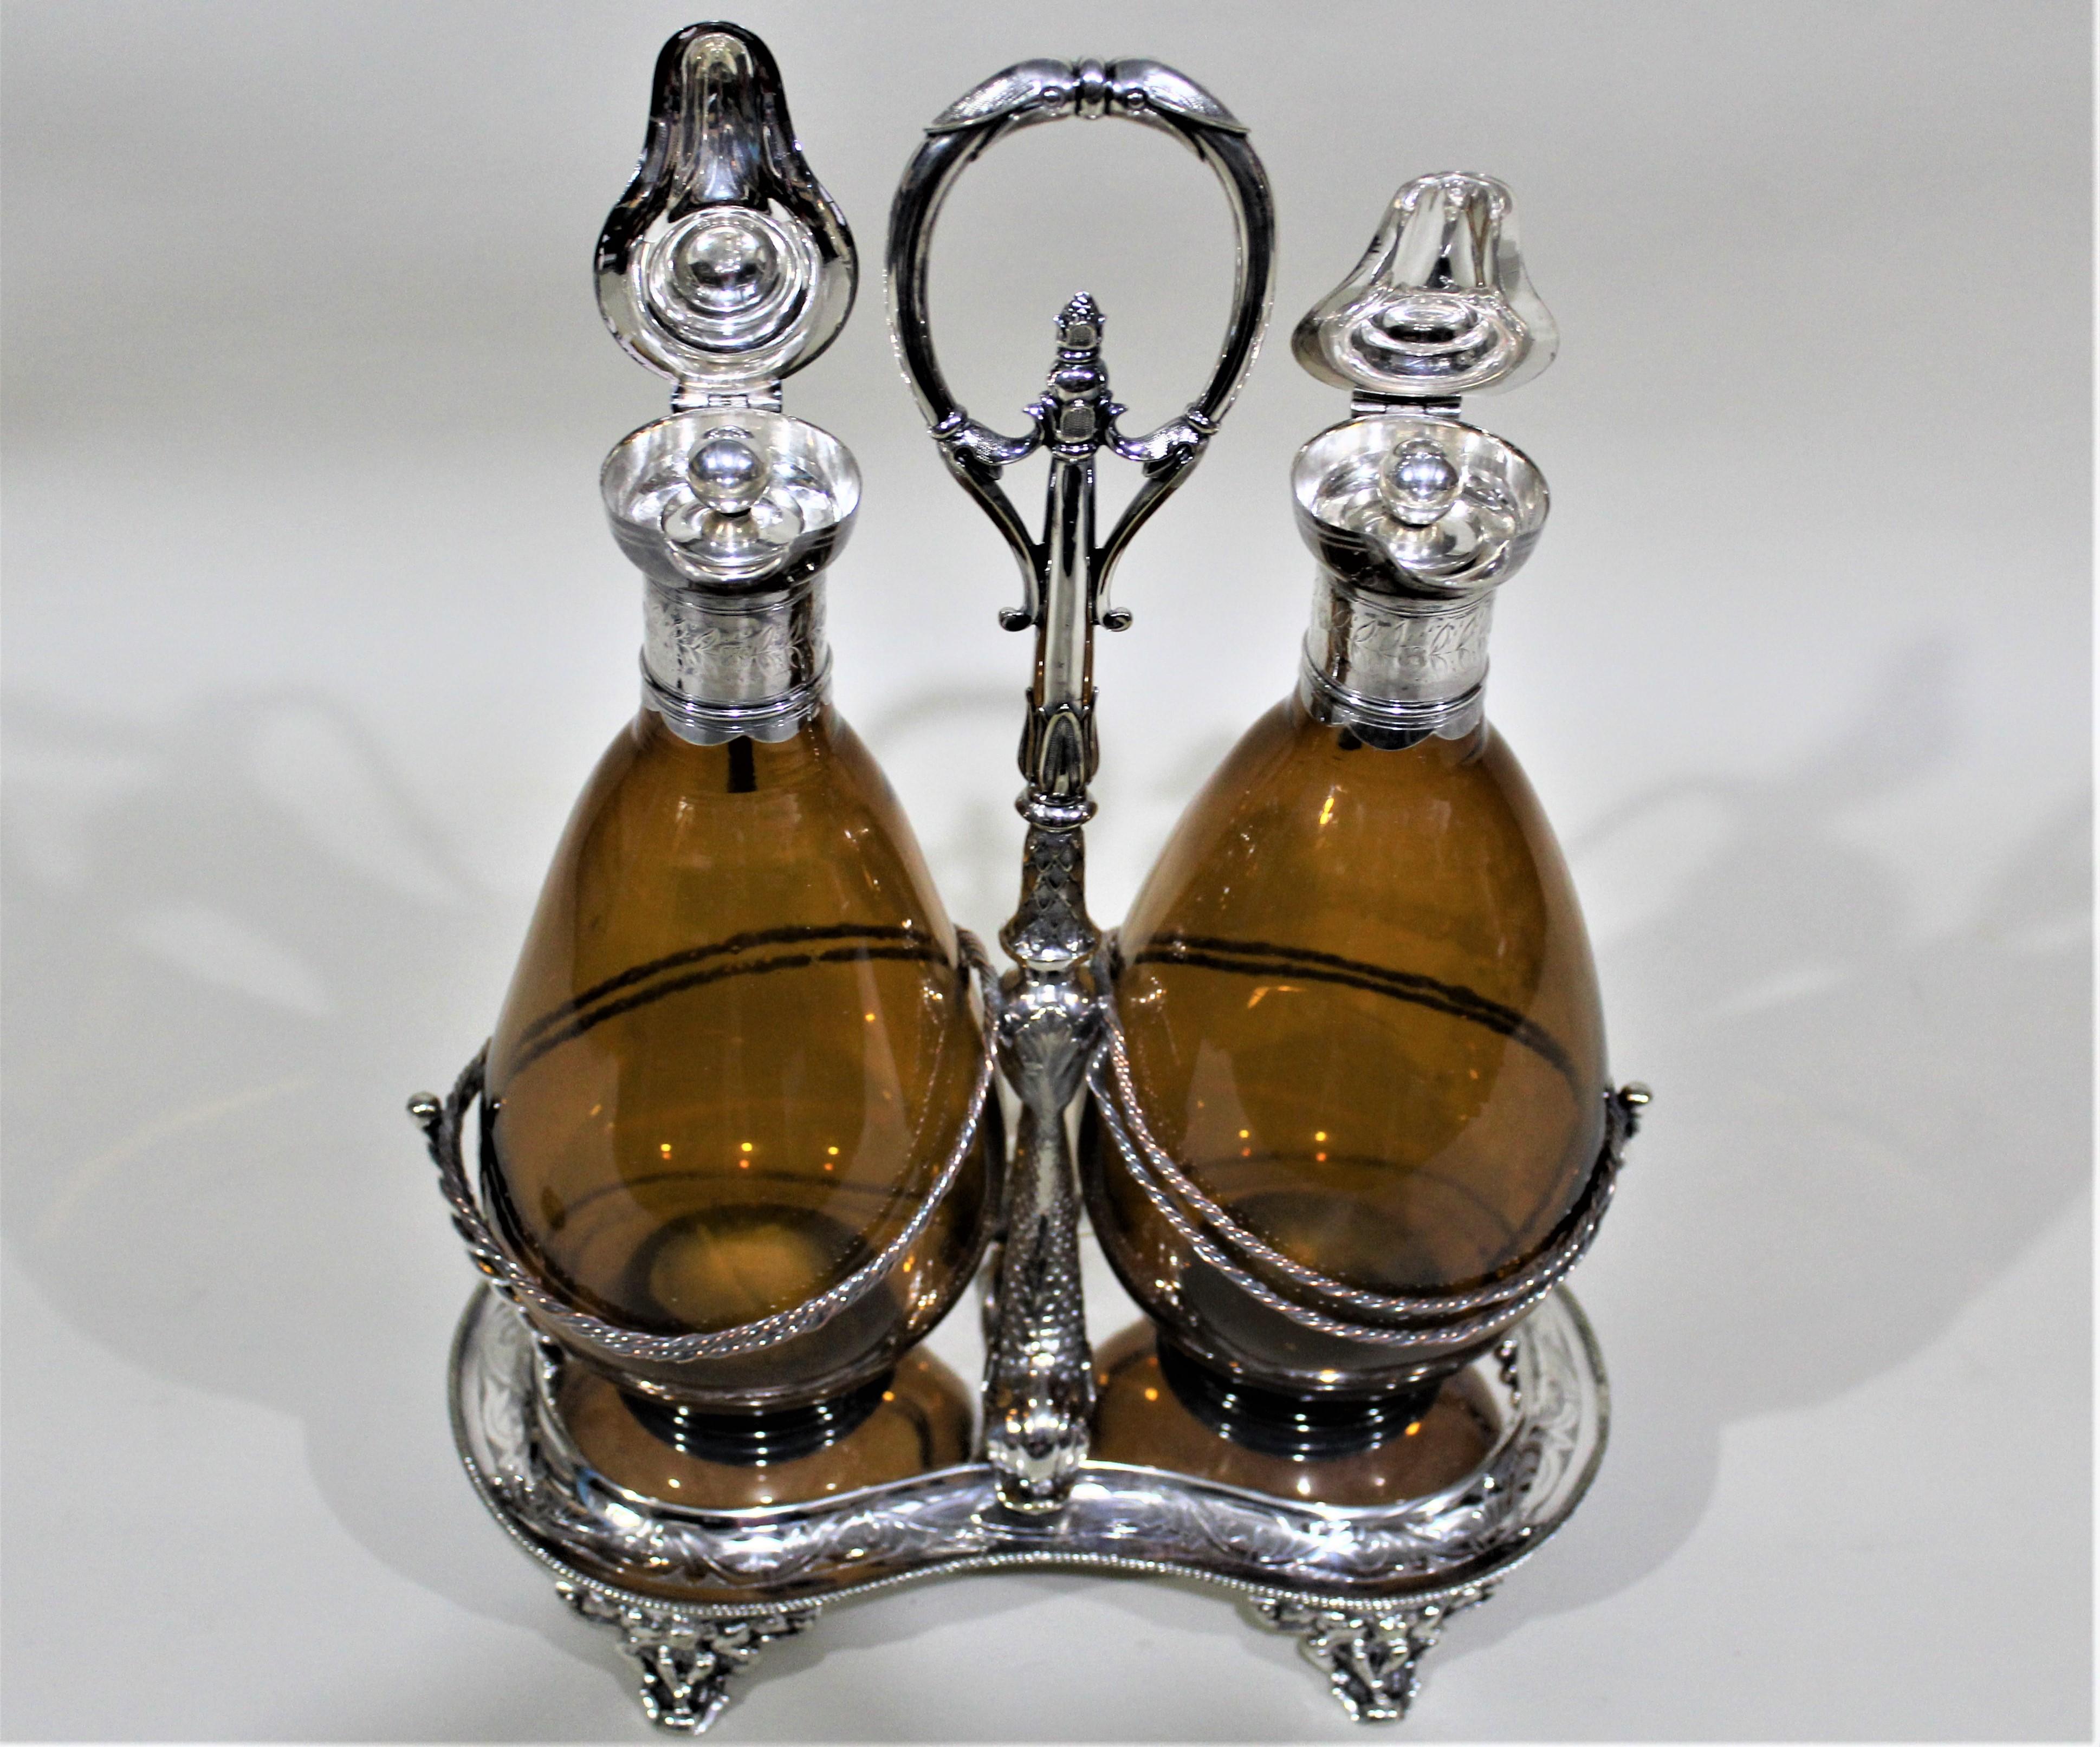 Hand-Crafted Victorian Silver Plated Tantalus or Sherry Stand with Amber Glass Bottles